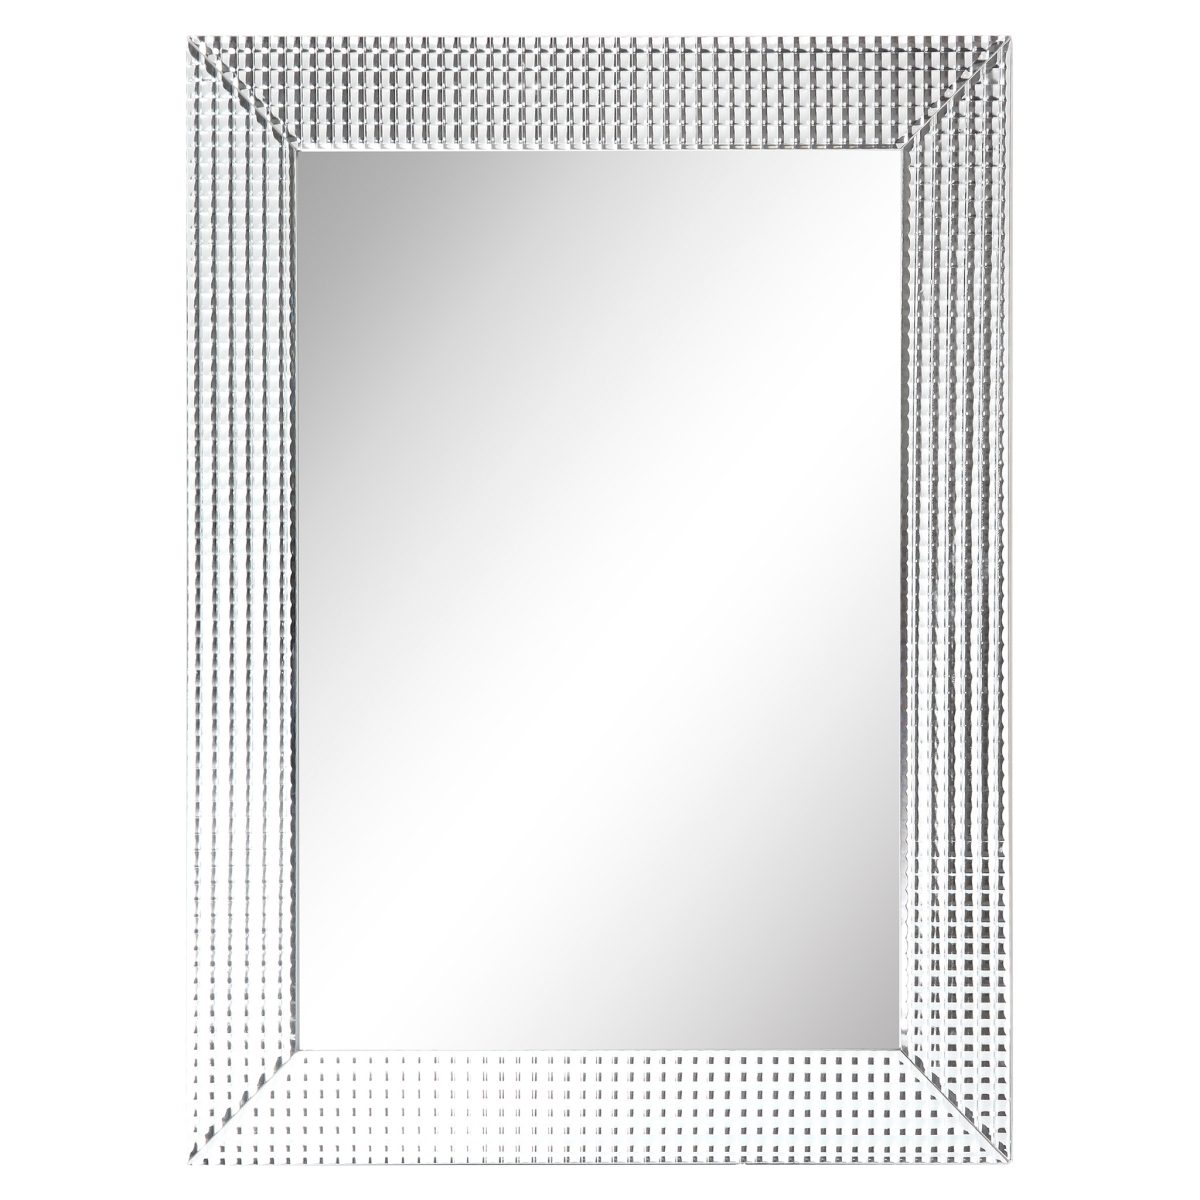 Mom-69100-4030 Bling Beveled Glass Mirrorsolid Wood Frame Covered With Beveled Prism Mirror Panels - 1 In. Beveled Center Mirror